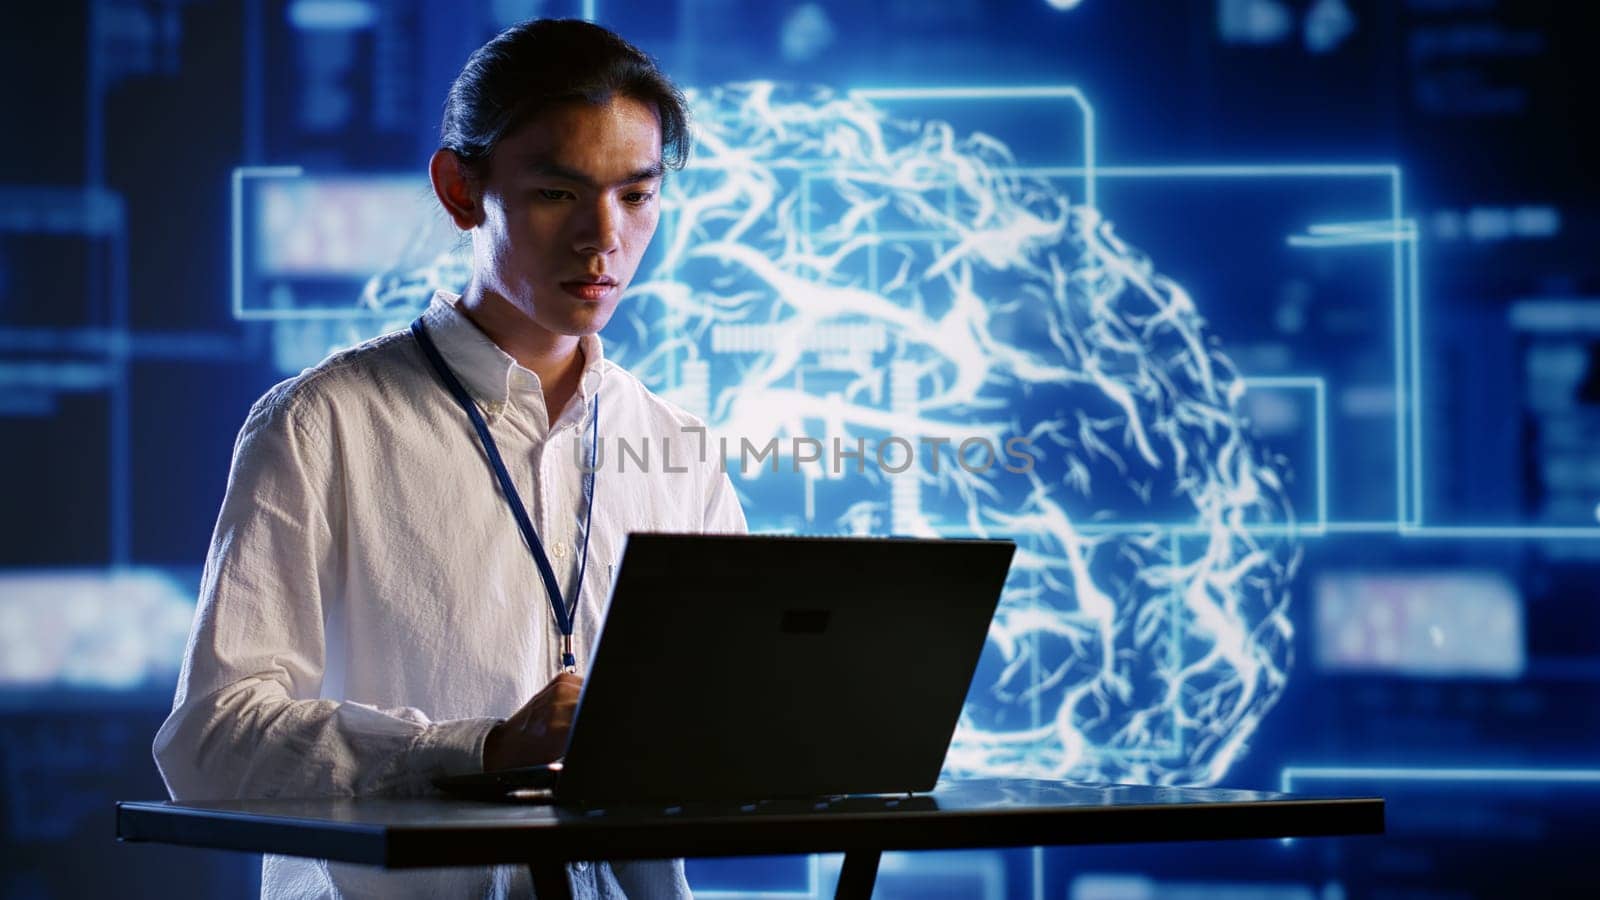 Admin using laptop to visualize artificial intelligence neural networks made up of interconnected nodes using augmented reality technology. Supervisor oversees AI systems processing information